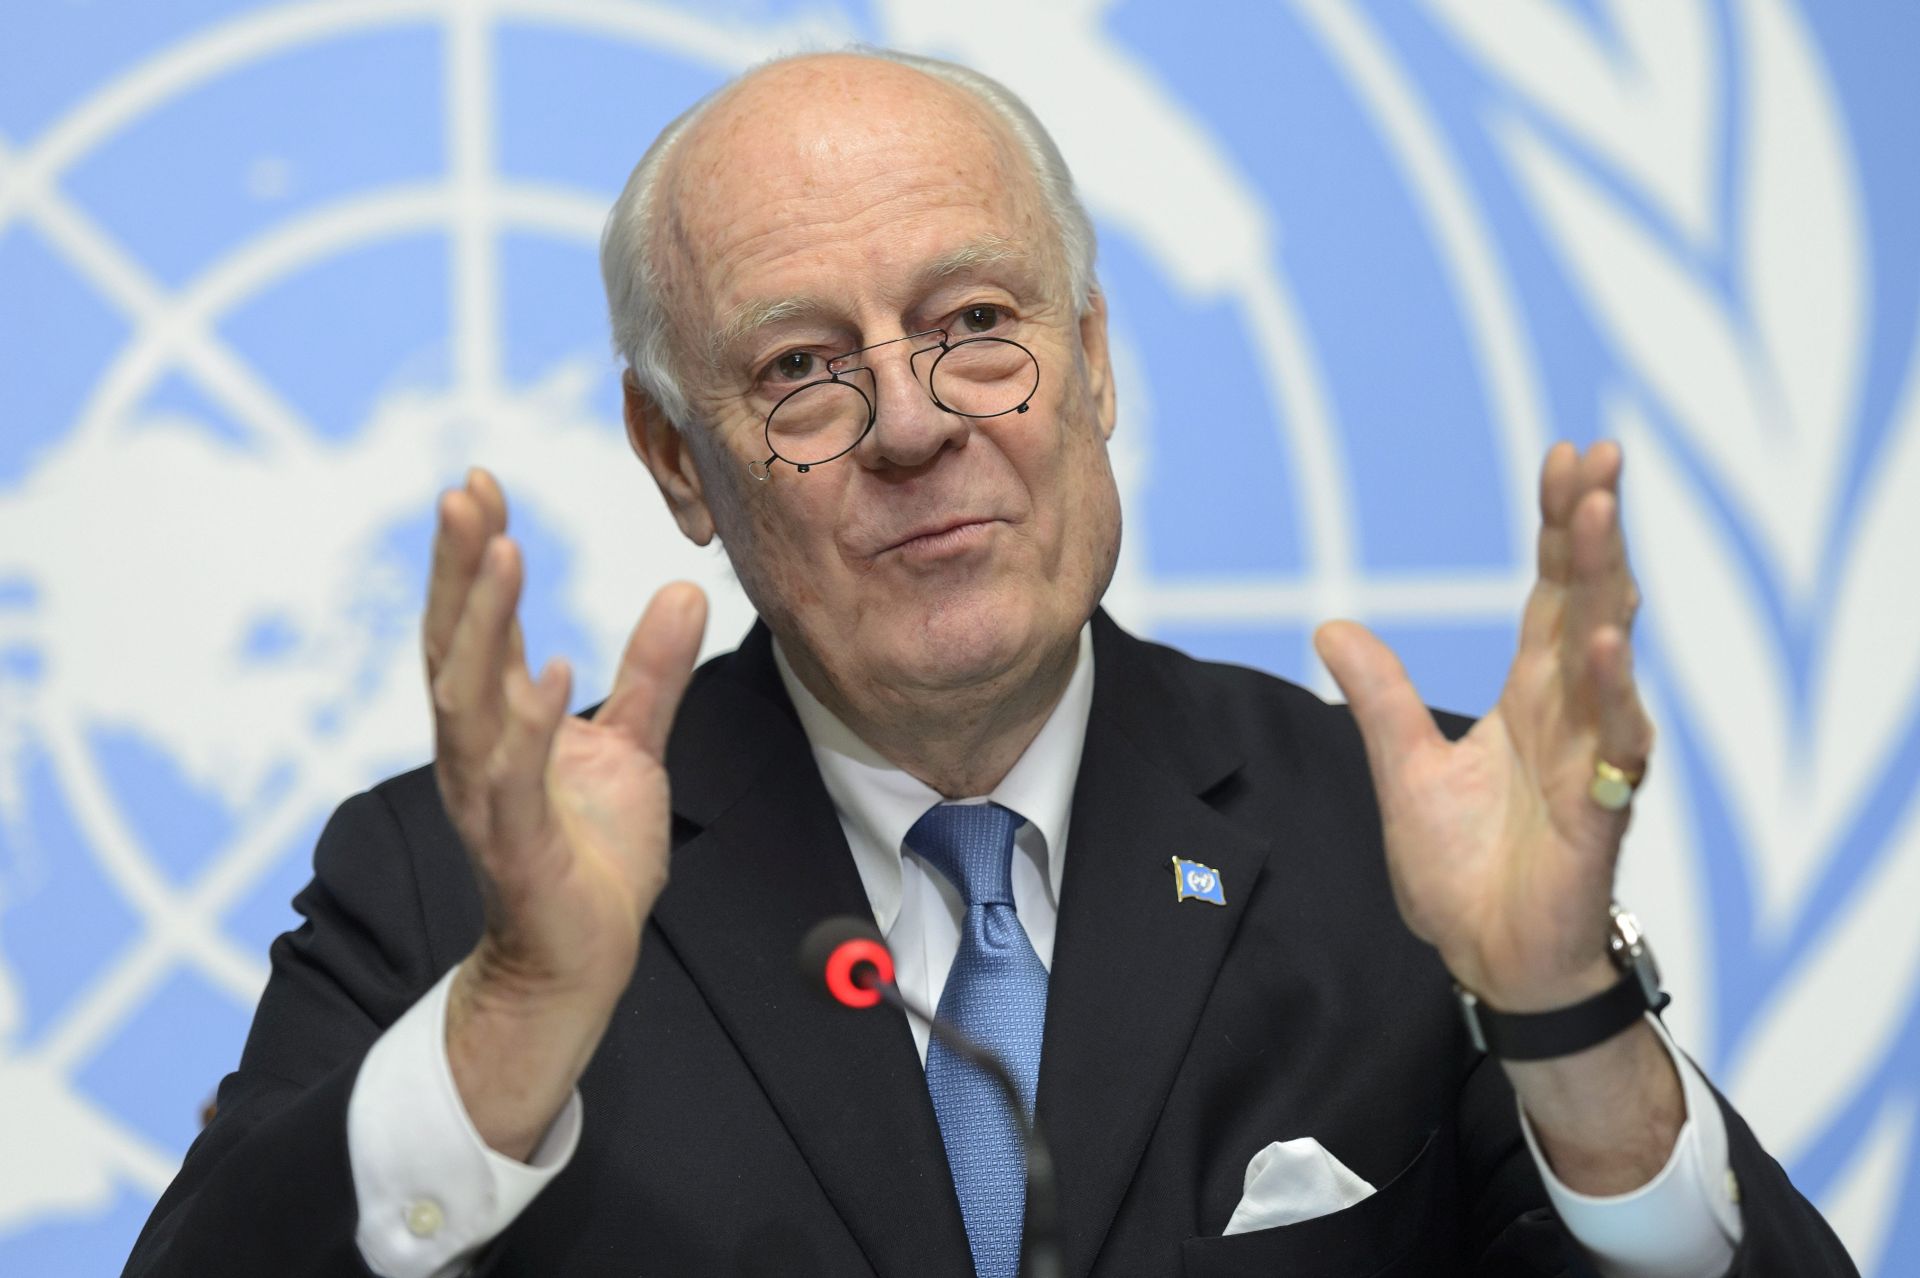 epa05229504 Staffan de Mistura, UN Special Envoy of the Secretary-General for Syria, speaks during a press conference after a round of negotiations about the Syrian Crisis, at the European headquarters of the United Nations in Geneva, Switzerland, 24 March 2016.  EPA/MARTIAL TREZZINI